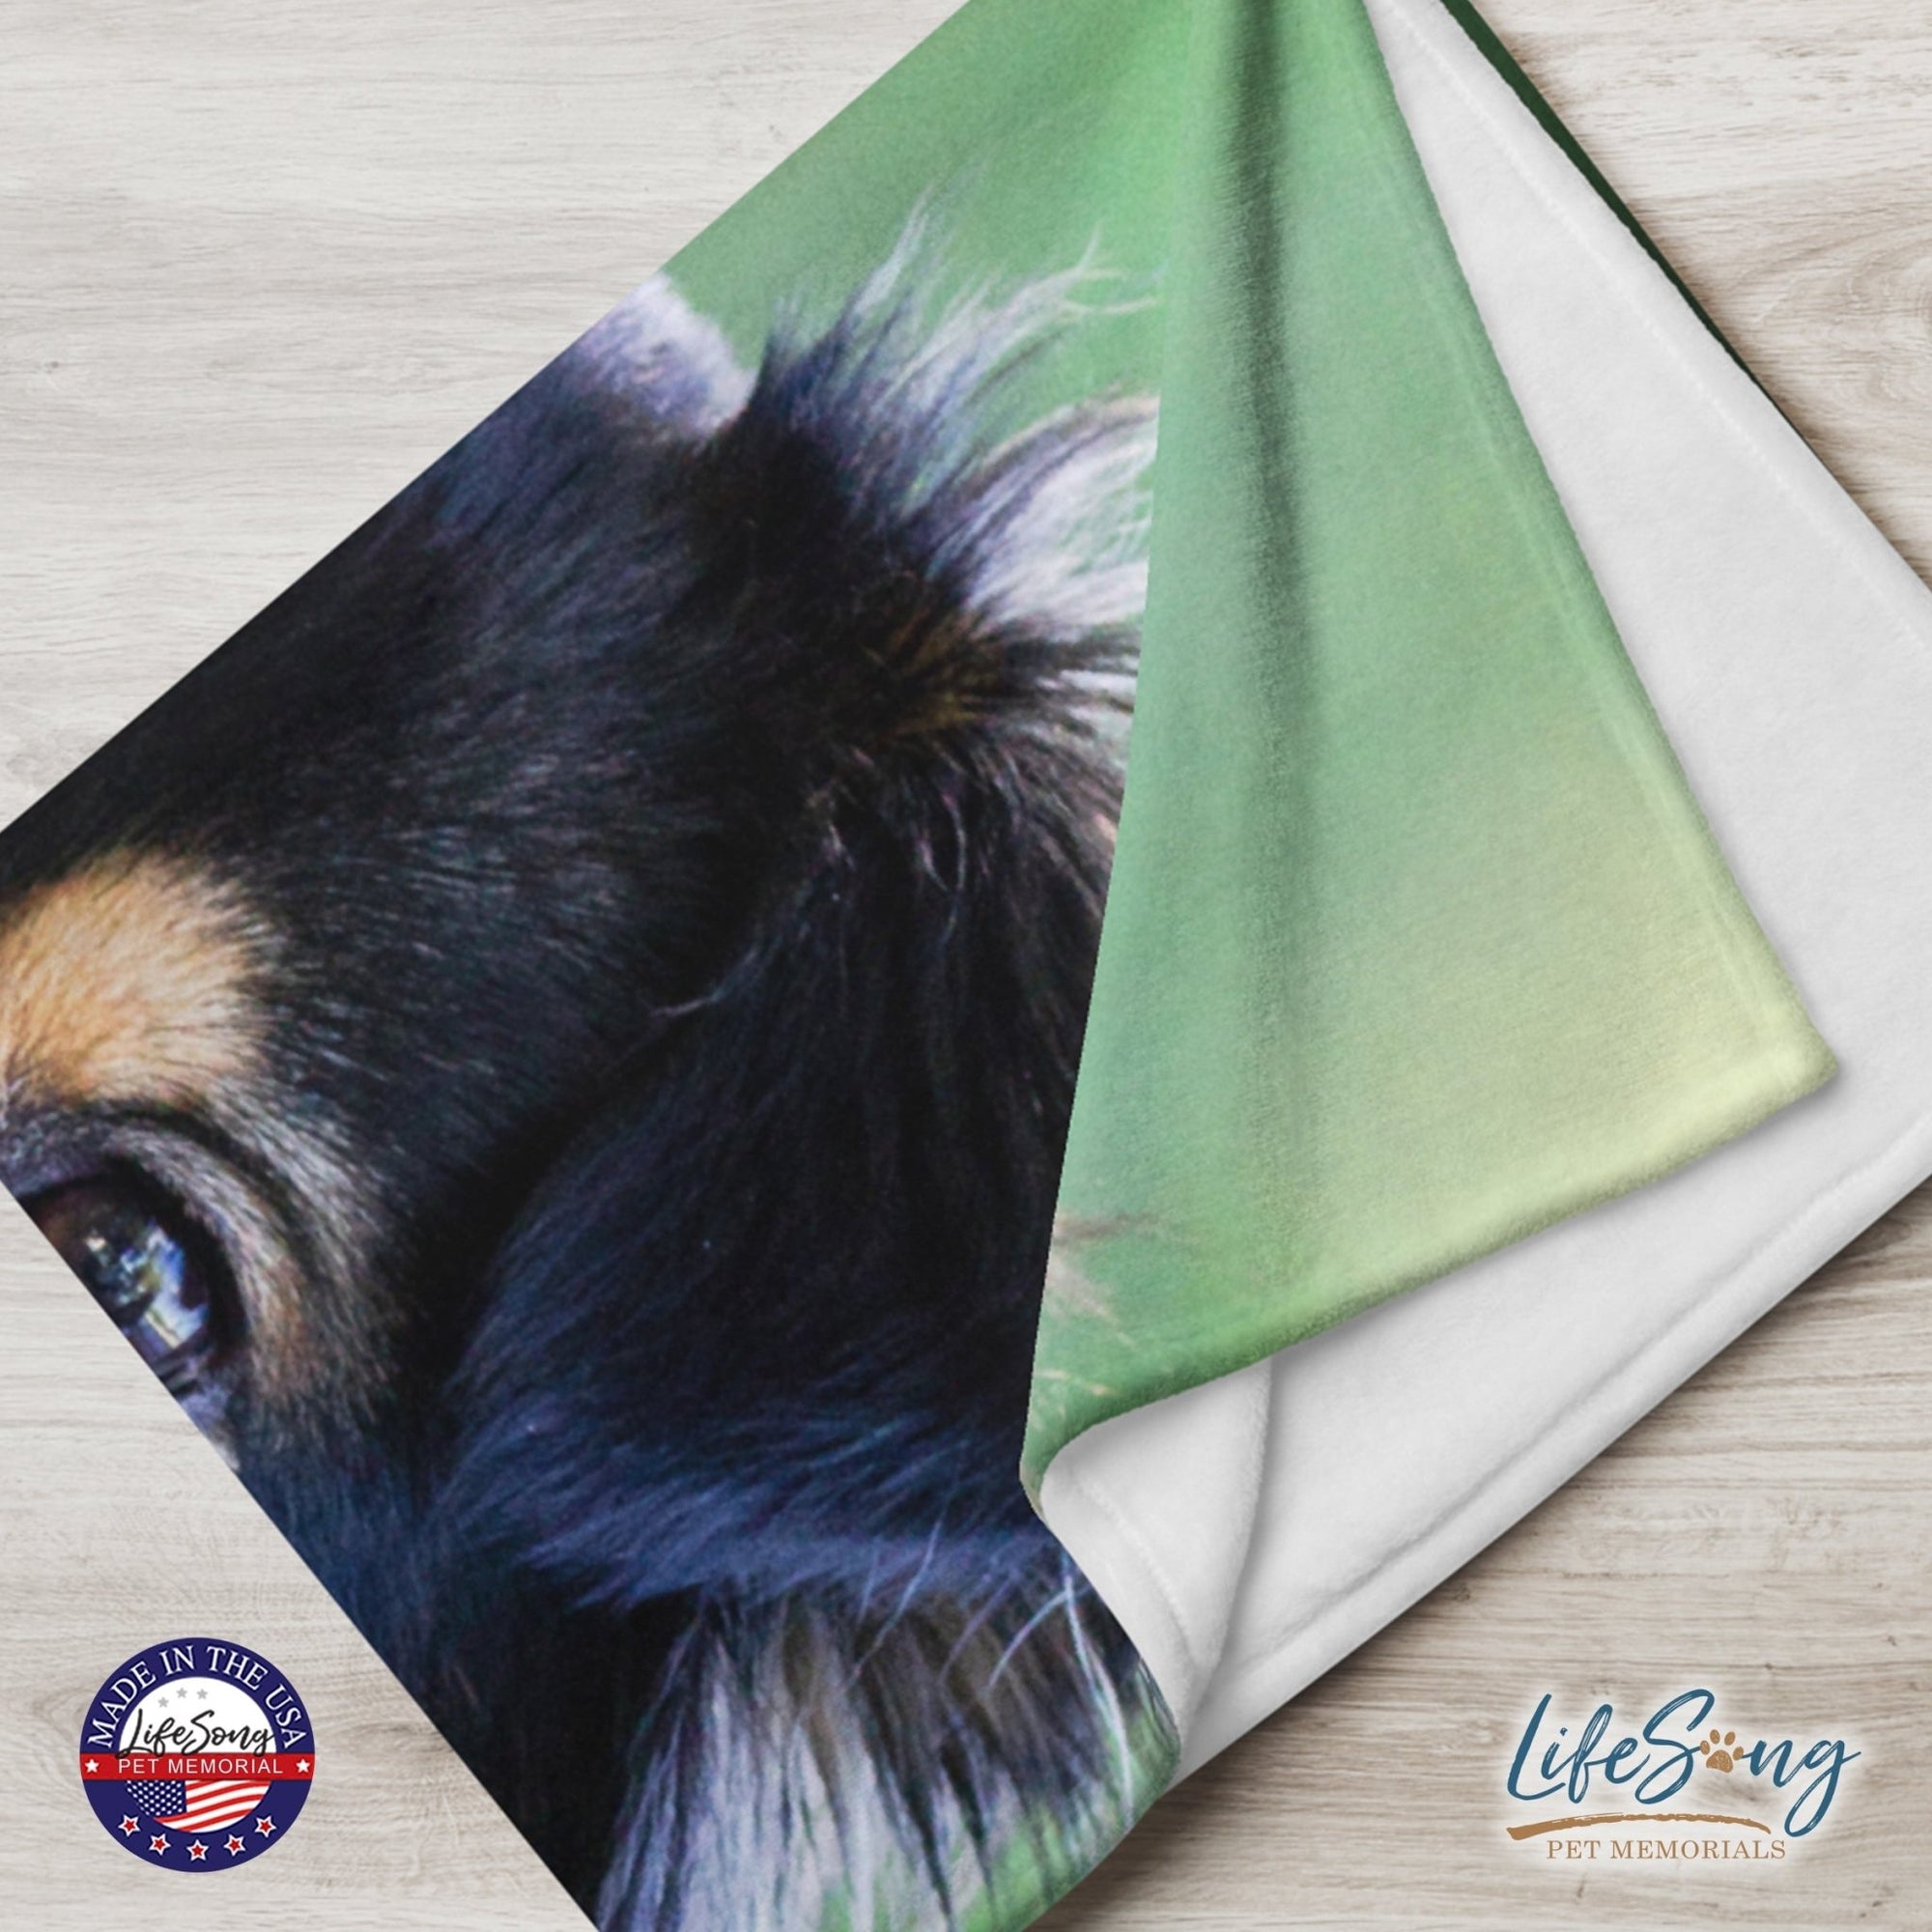 Personalized Pet Memorial Printed Throw Blanket - Once I Held You In My Arms - LifeSong Milestones